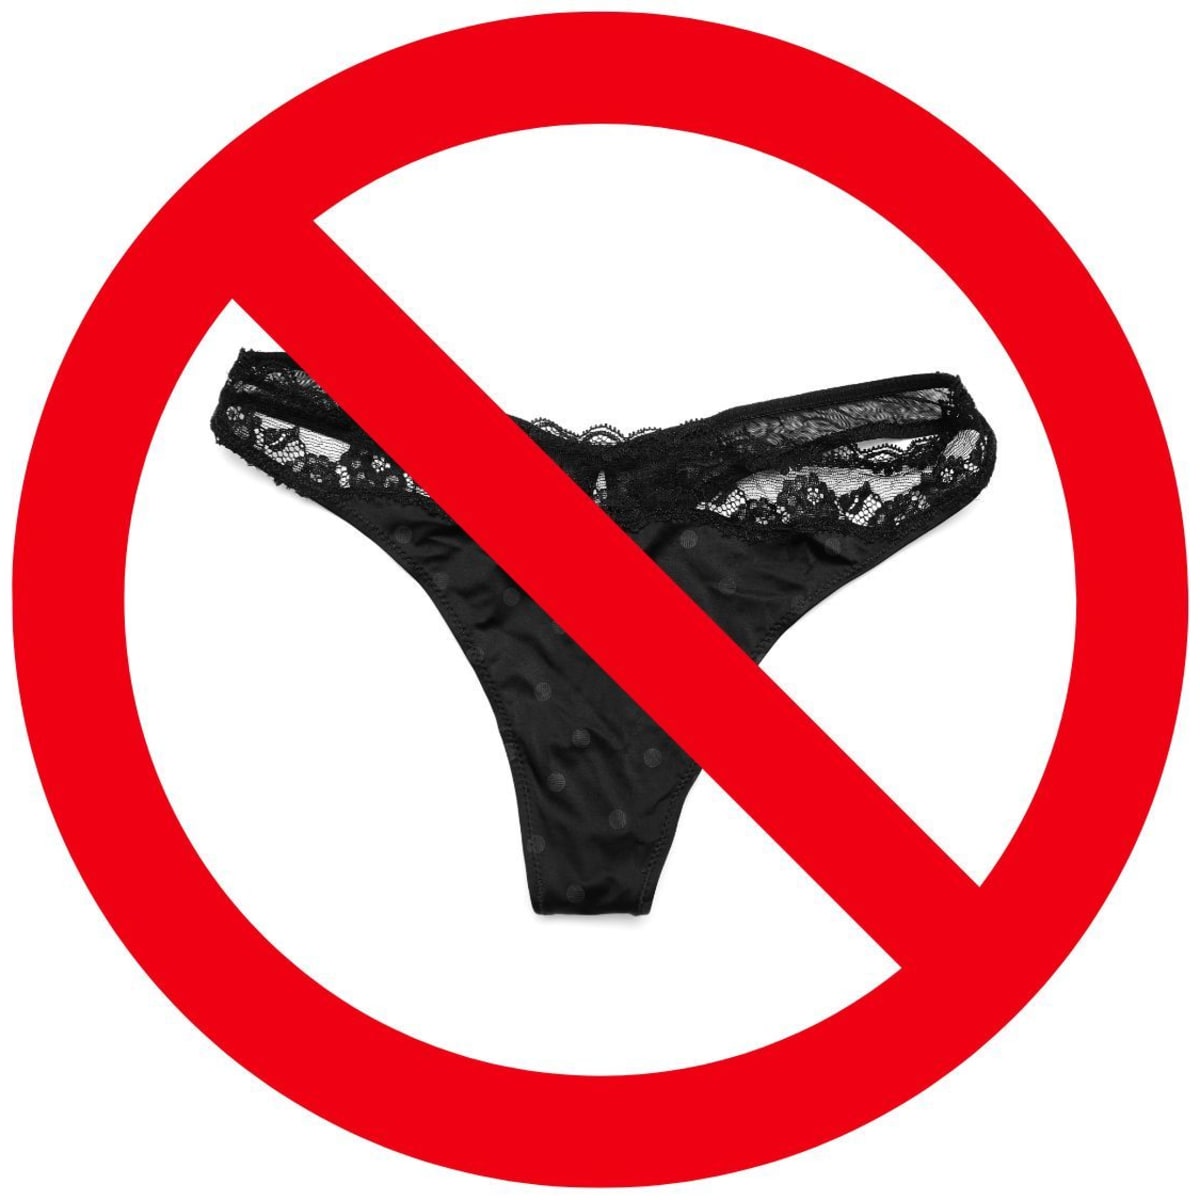 What Happens To Your Body When You Stop Wearing Underwear